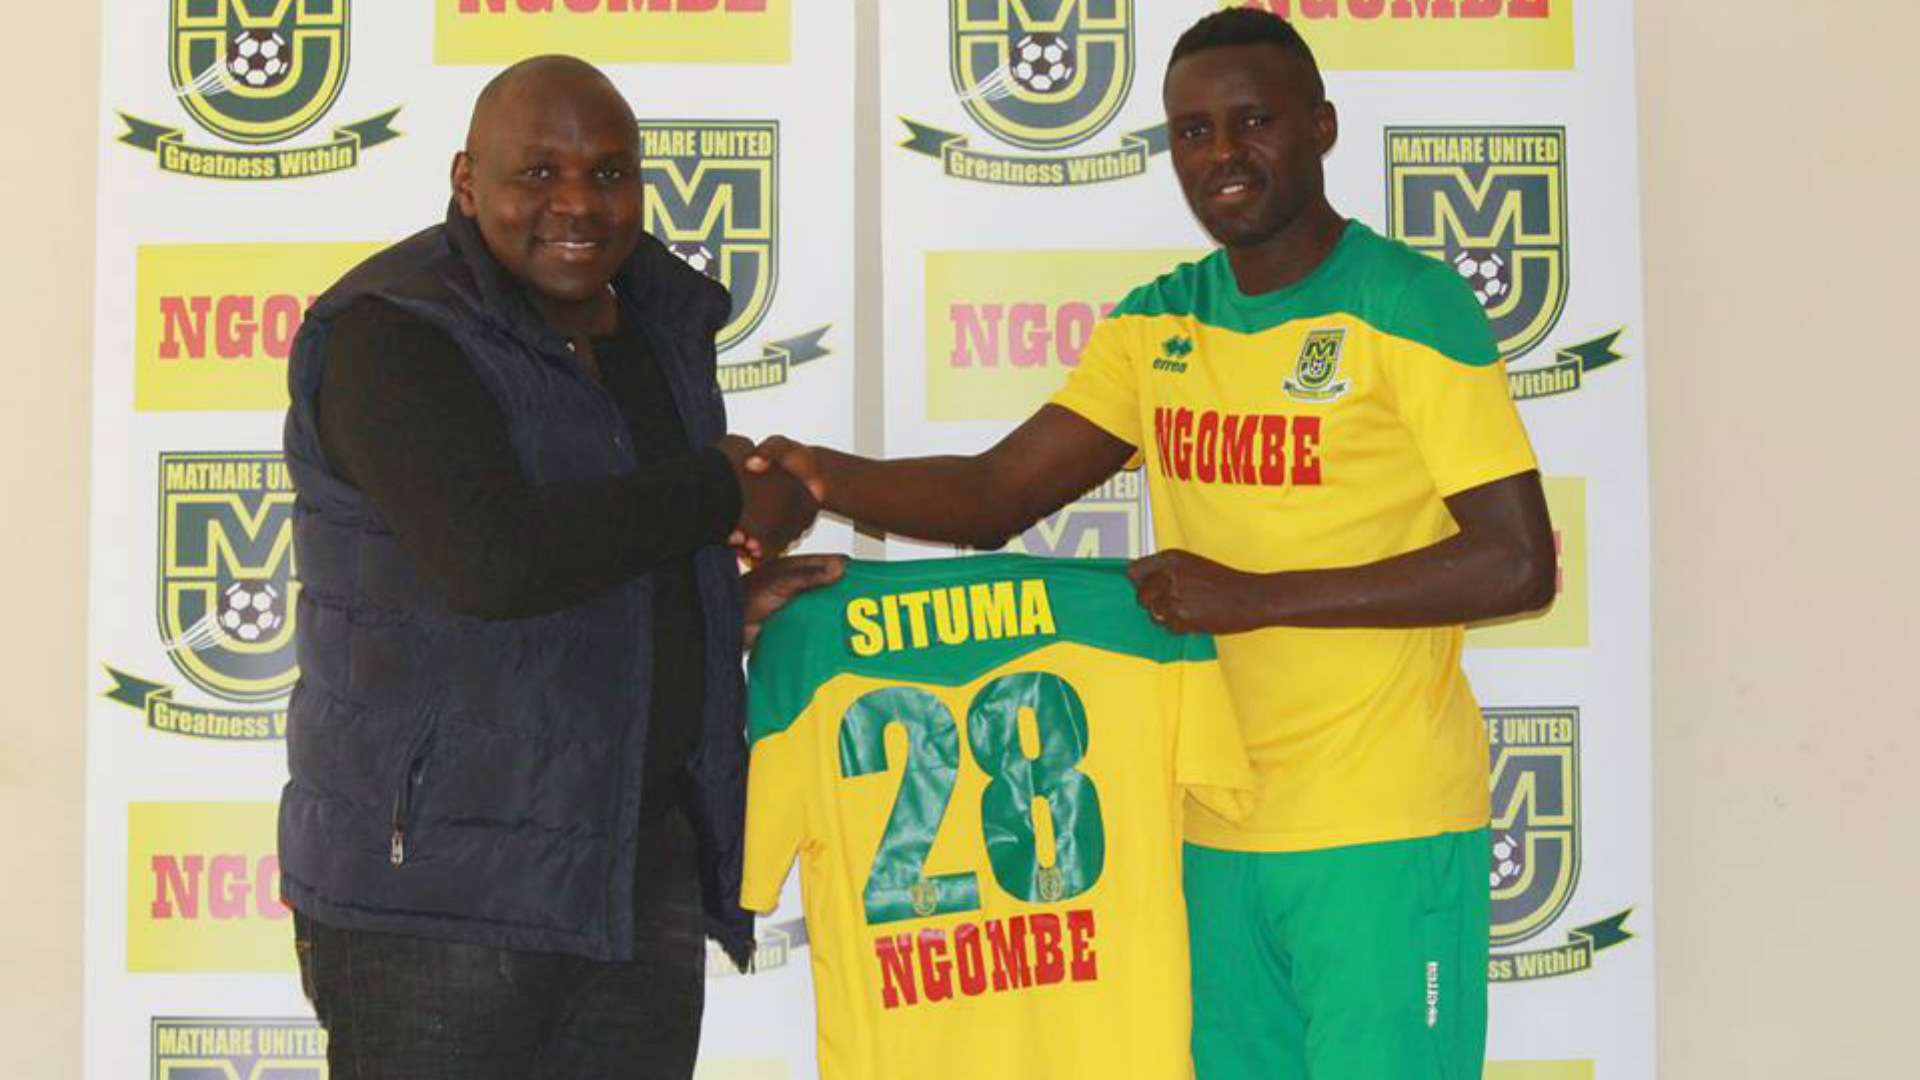 James Situma signs for Mathare United.